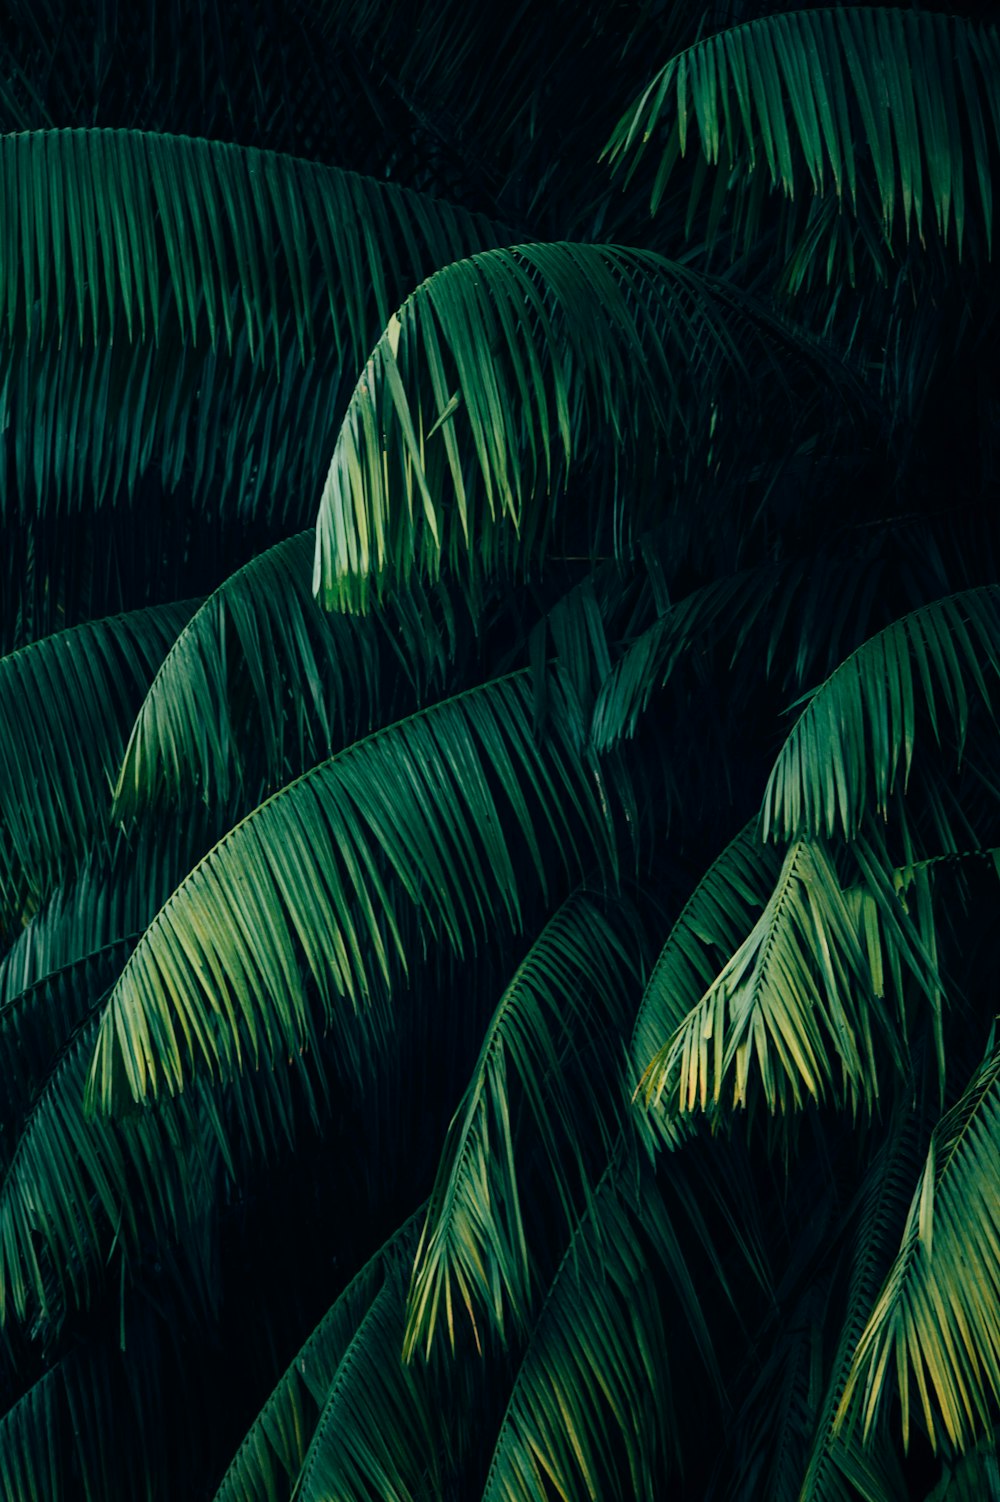 Coconut Leaves Pictures | Download Free Images on Unsplash